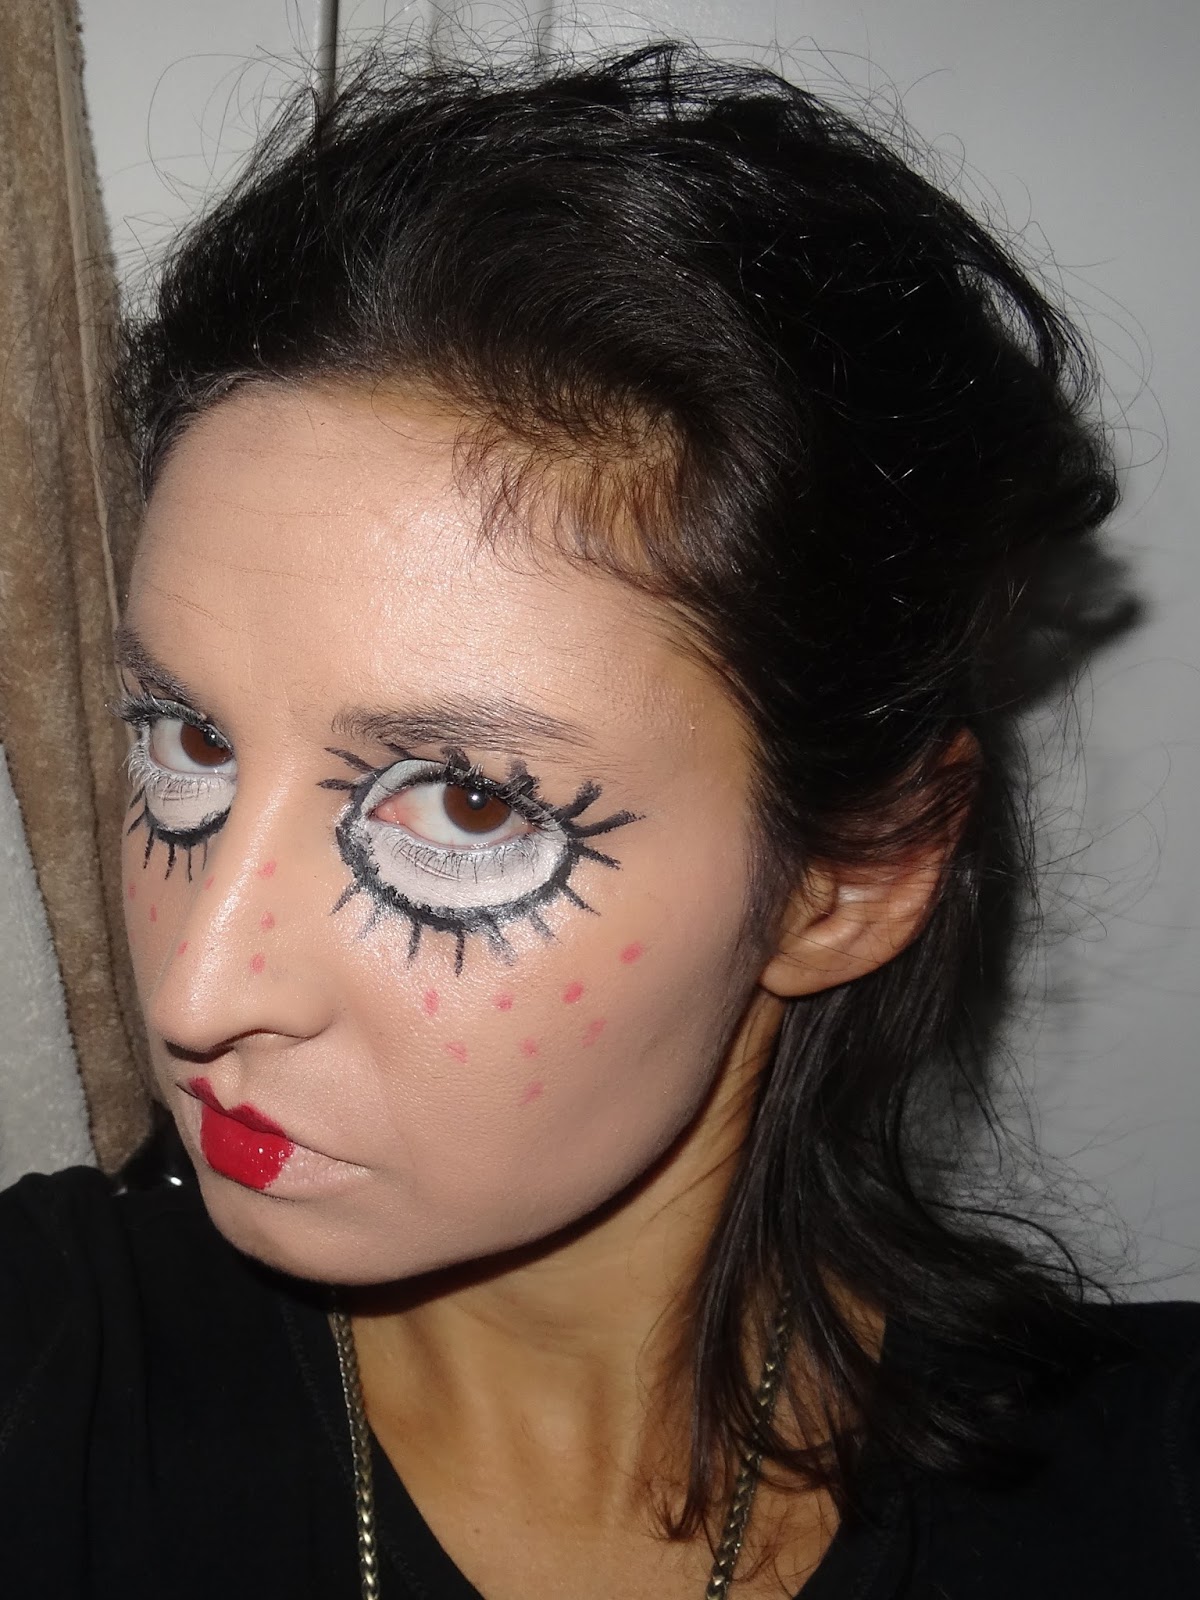 DOLL MAKEUP FOR HALLOWEEN / MAQUILLAGE POUPÉE POUR HALLOWEEN